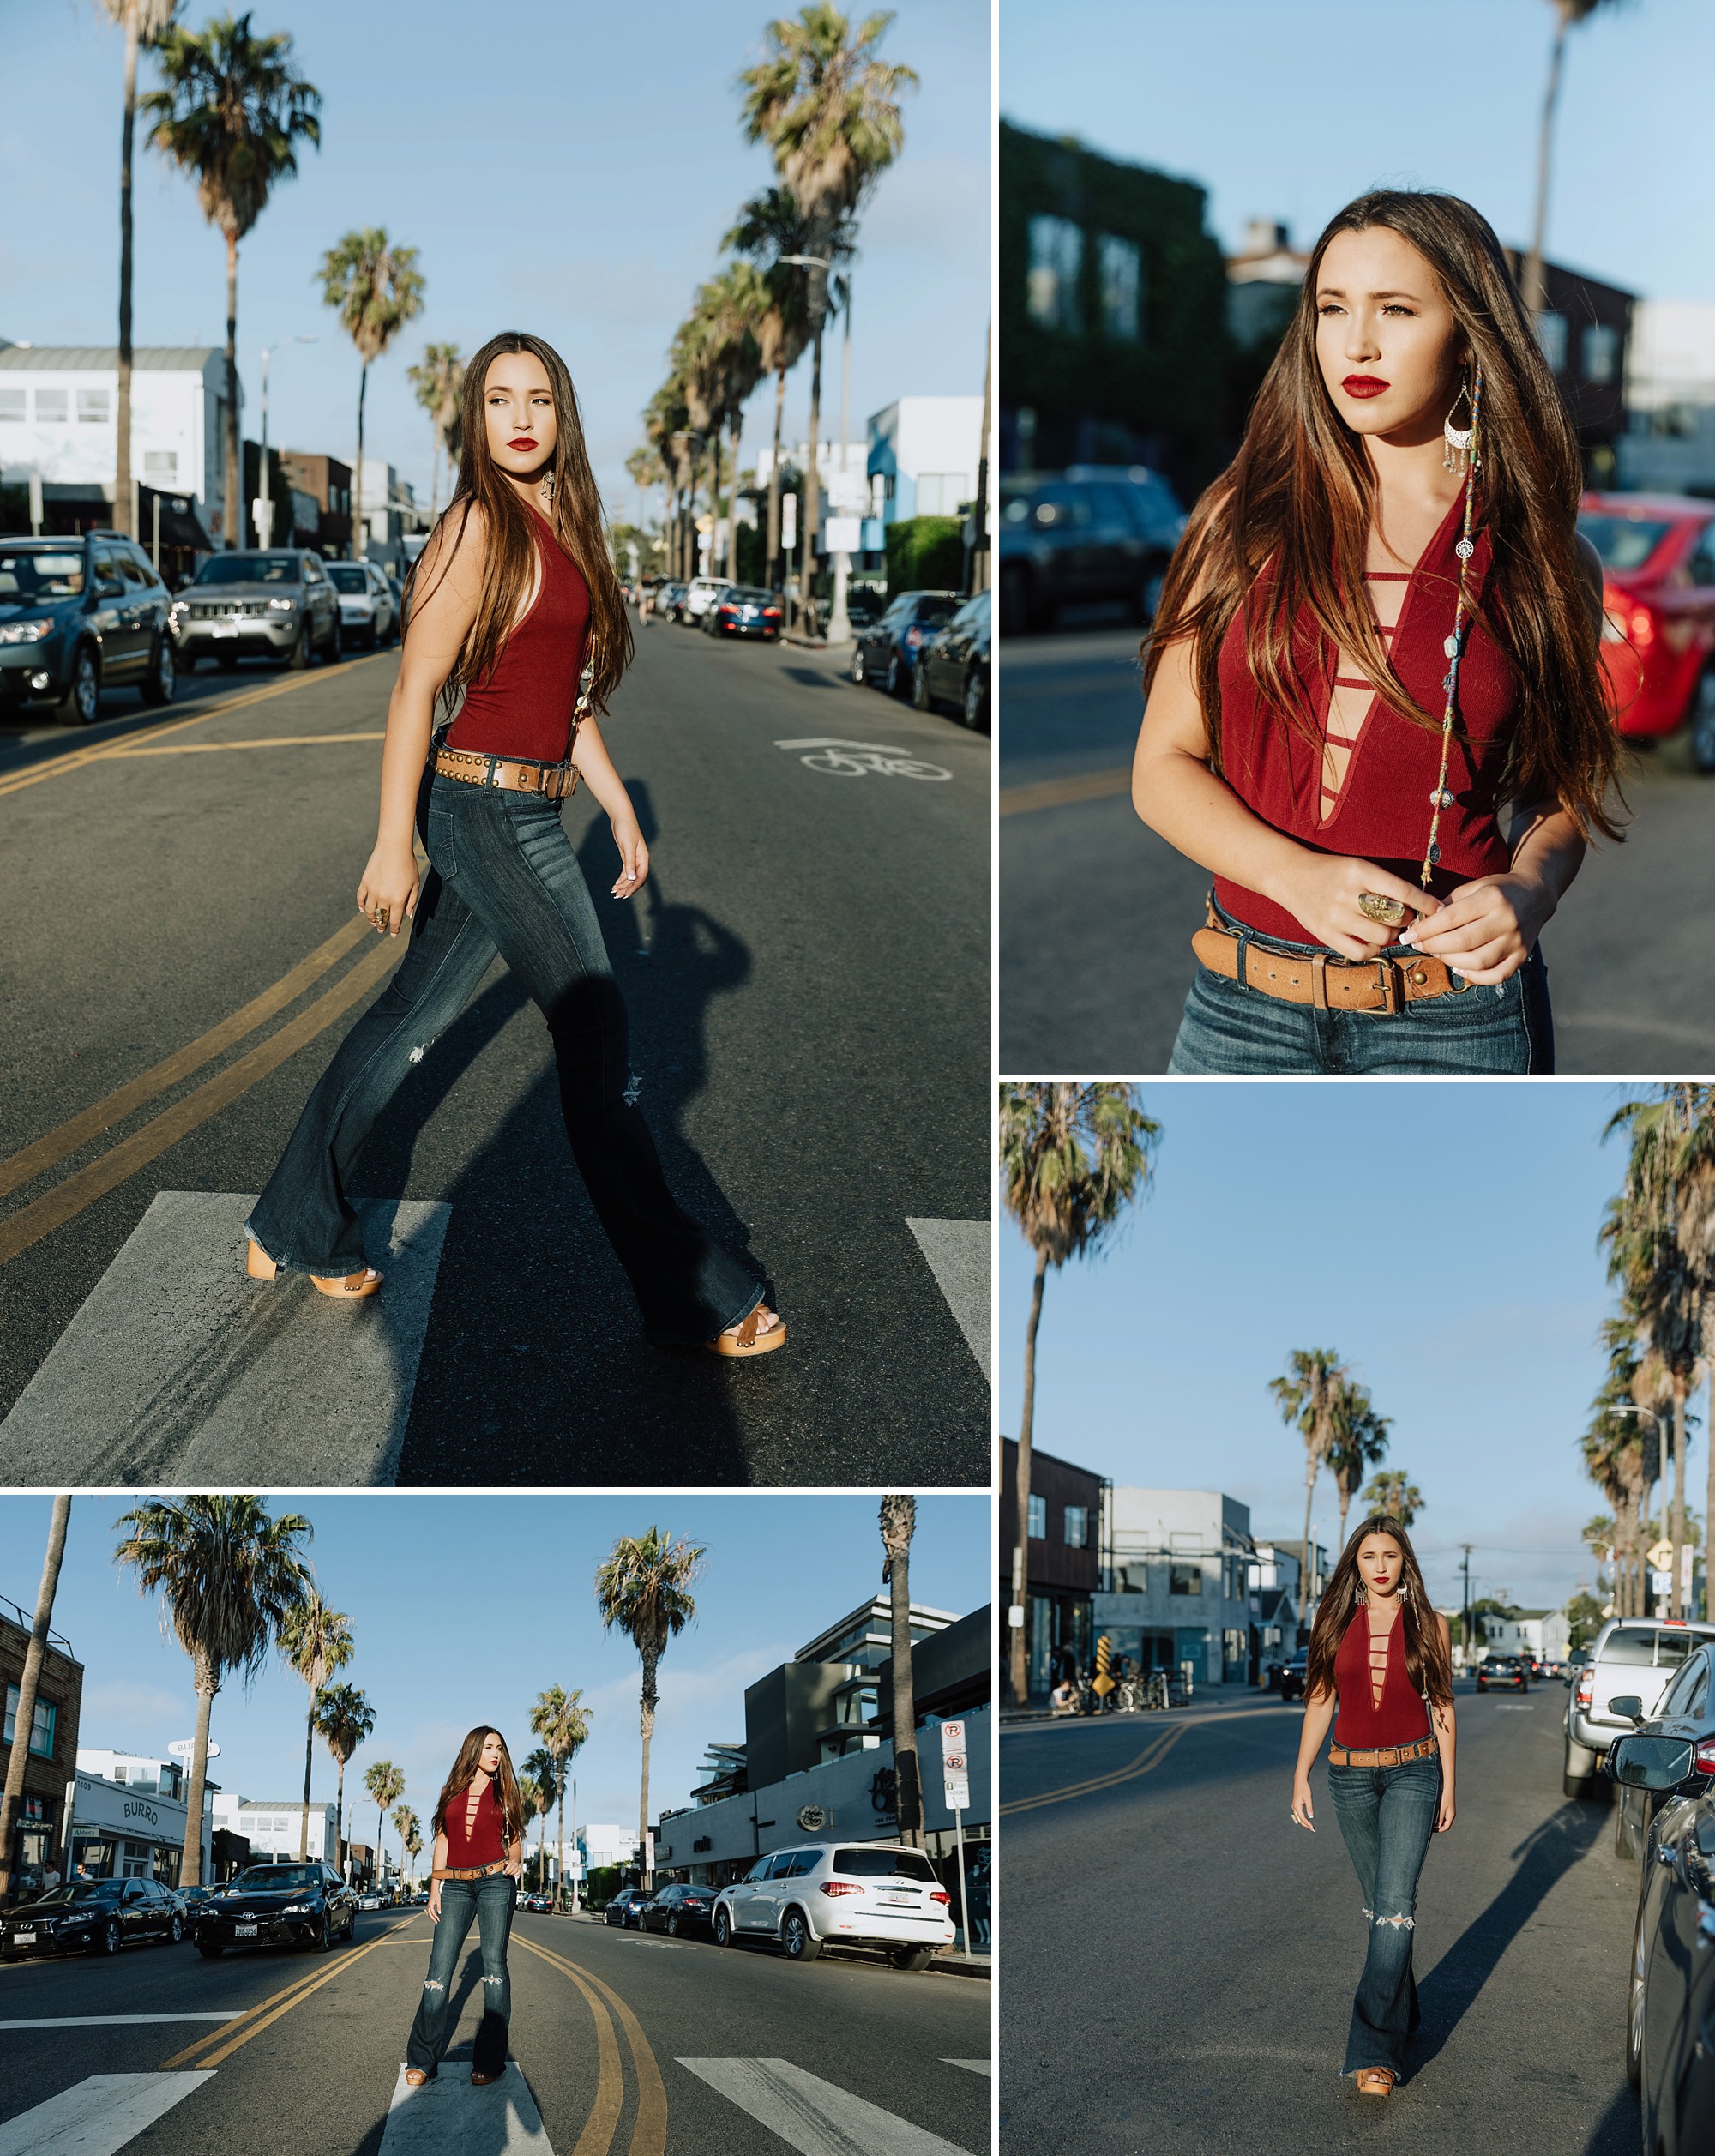 chic street look in venice california by tara rochelle, a professional photographer